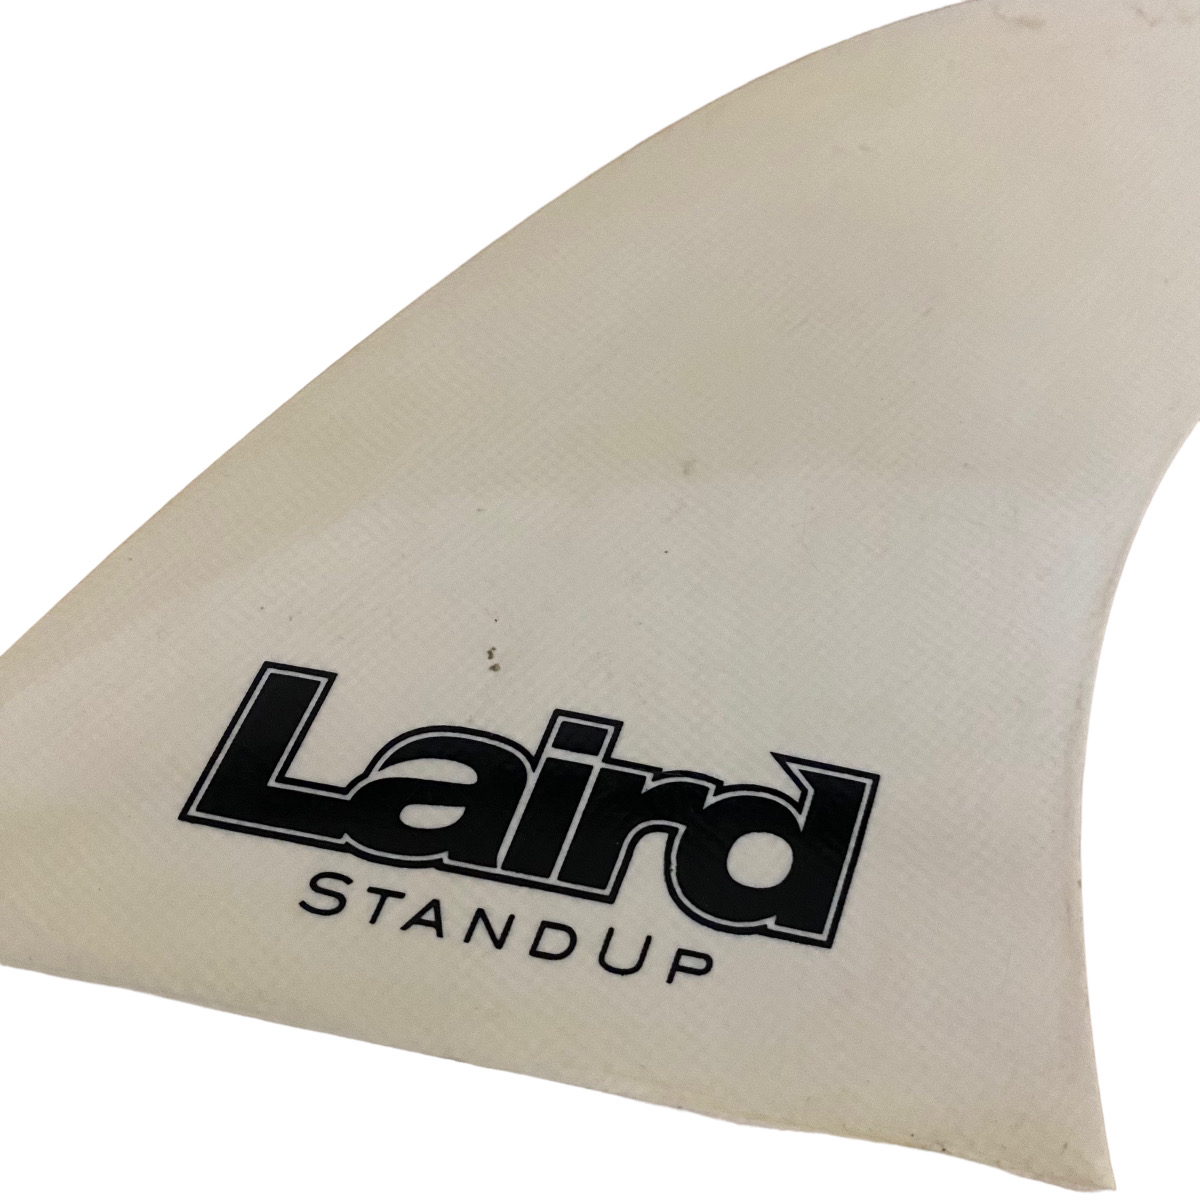 Laird STAND UP / Single Fin 5`0 / 中古フィン / USEDFIN